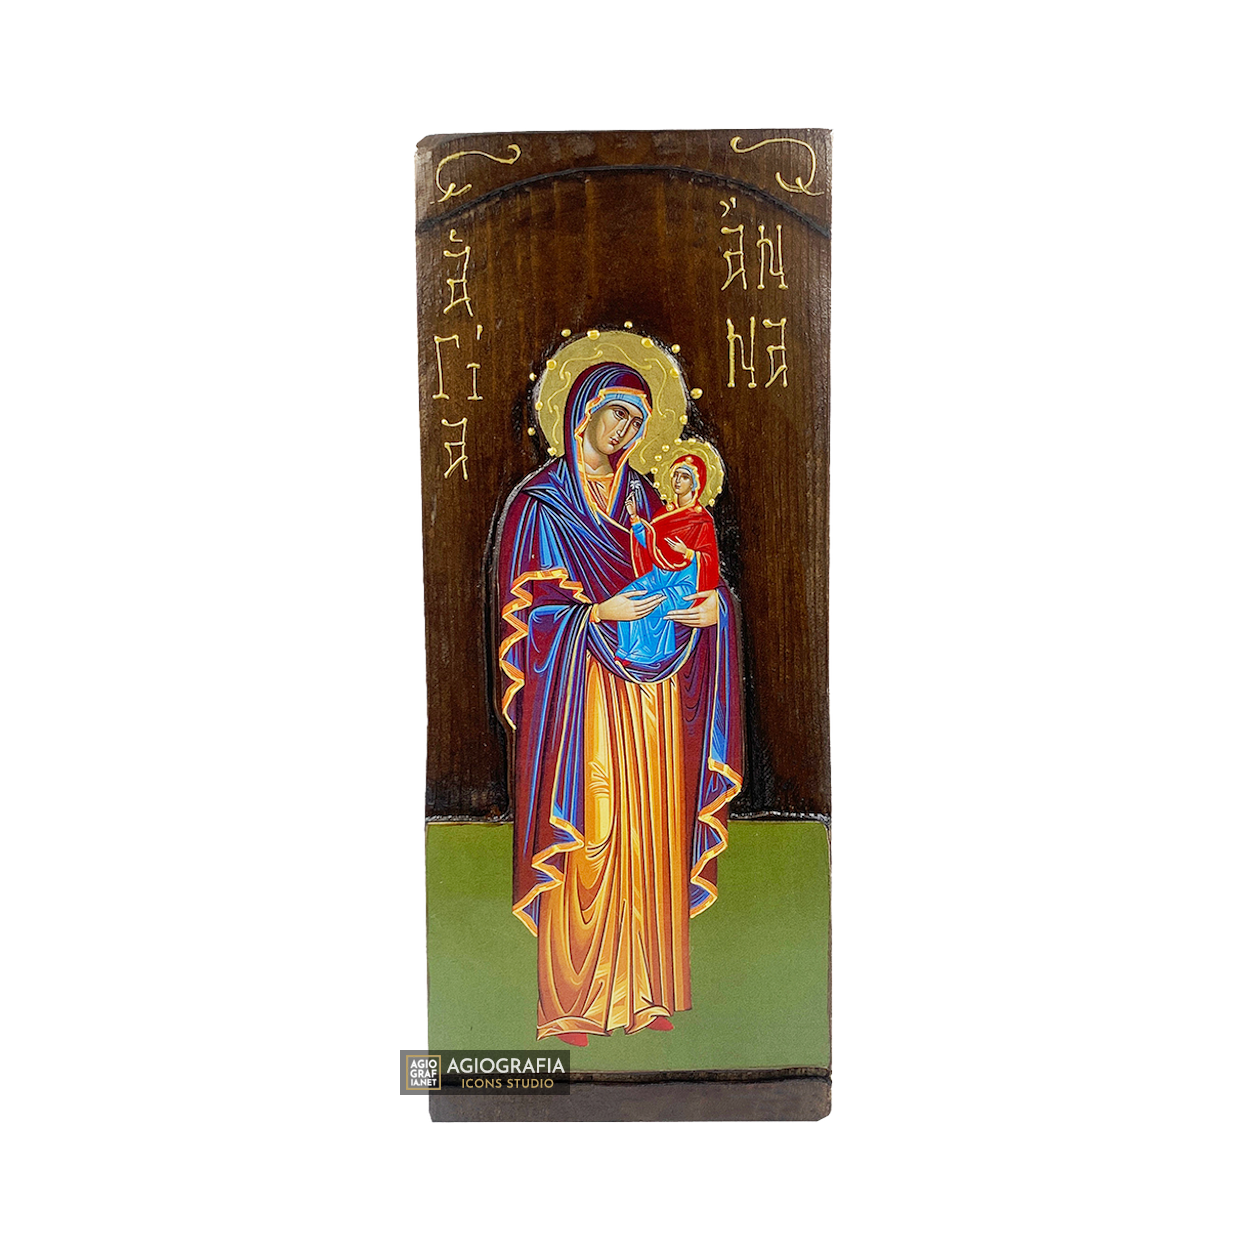 St Anna Christian Orthodox Gold Print Icon on Carved Wood